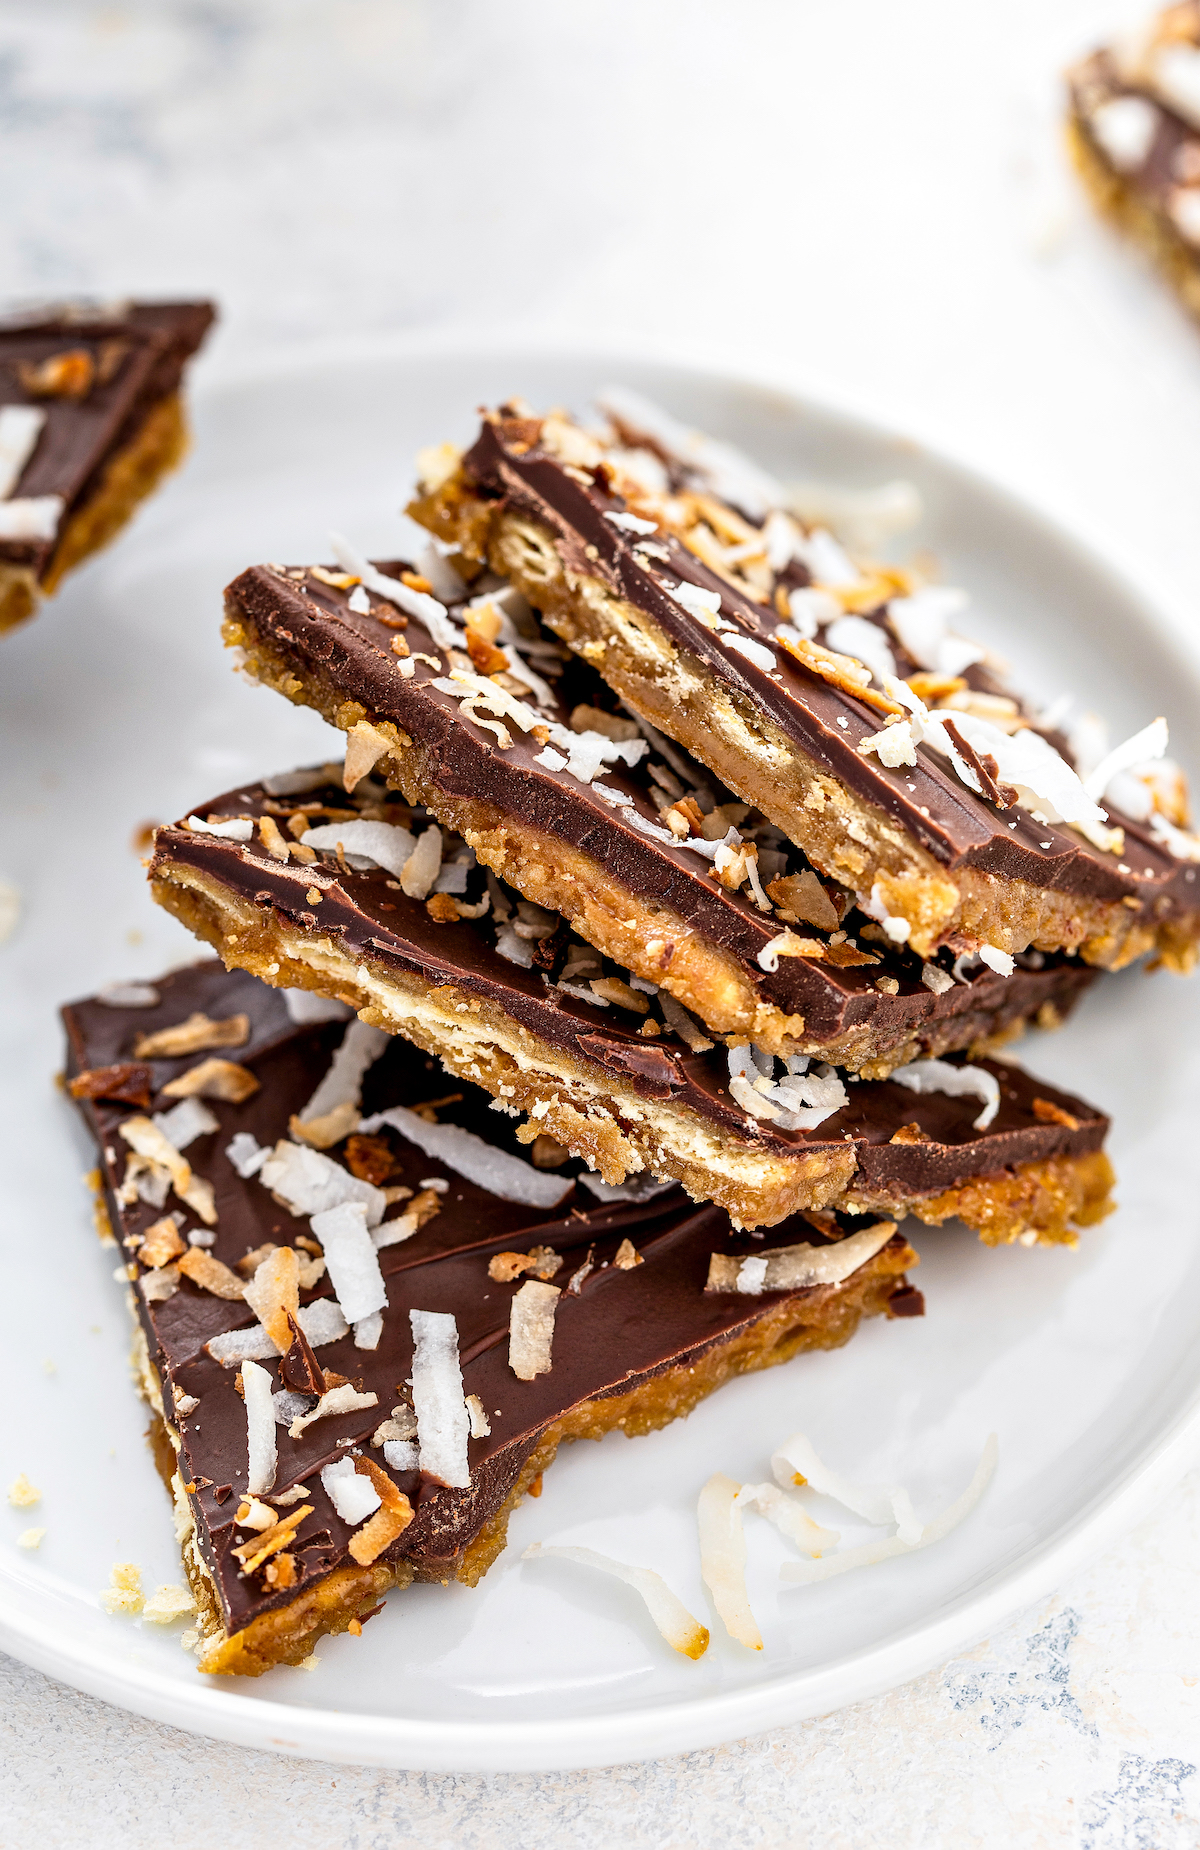 Coconut saltine cracker toffee broken into pieces on a plate.